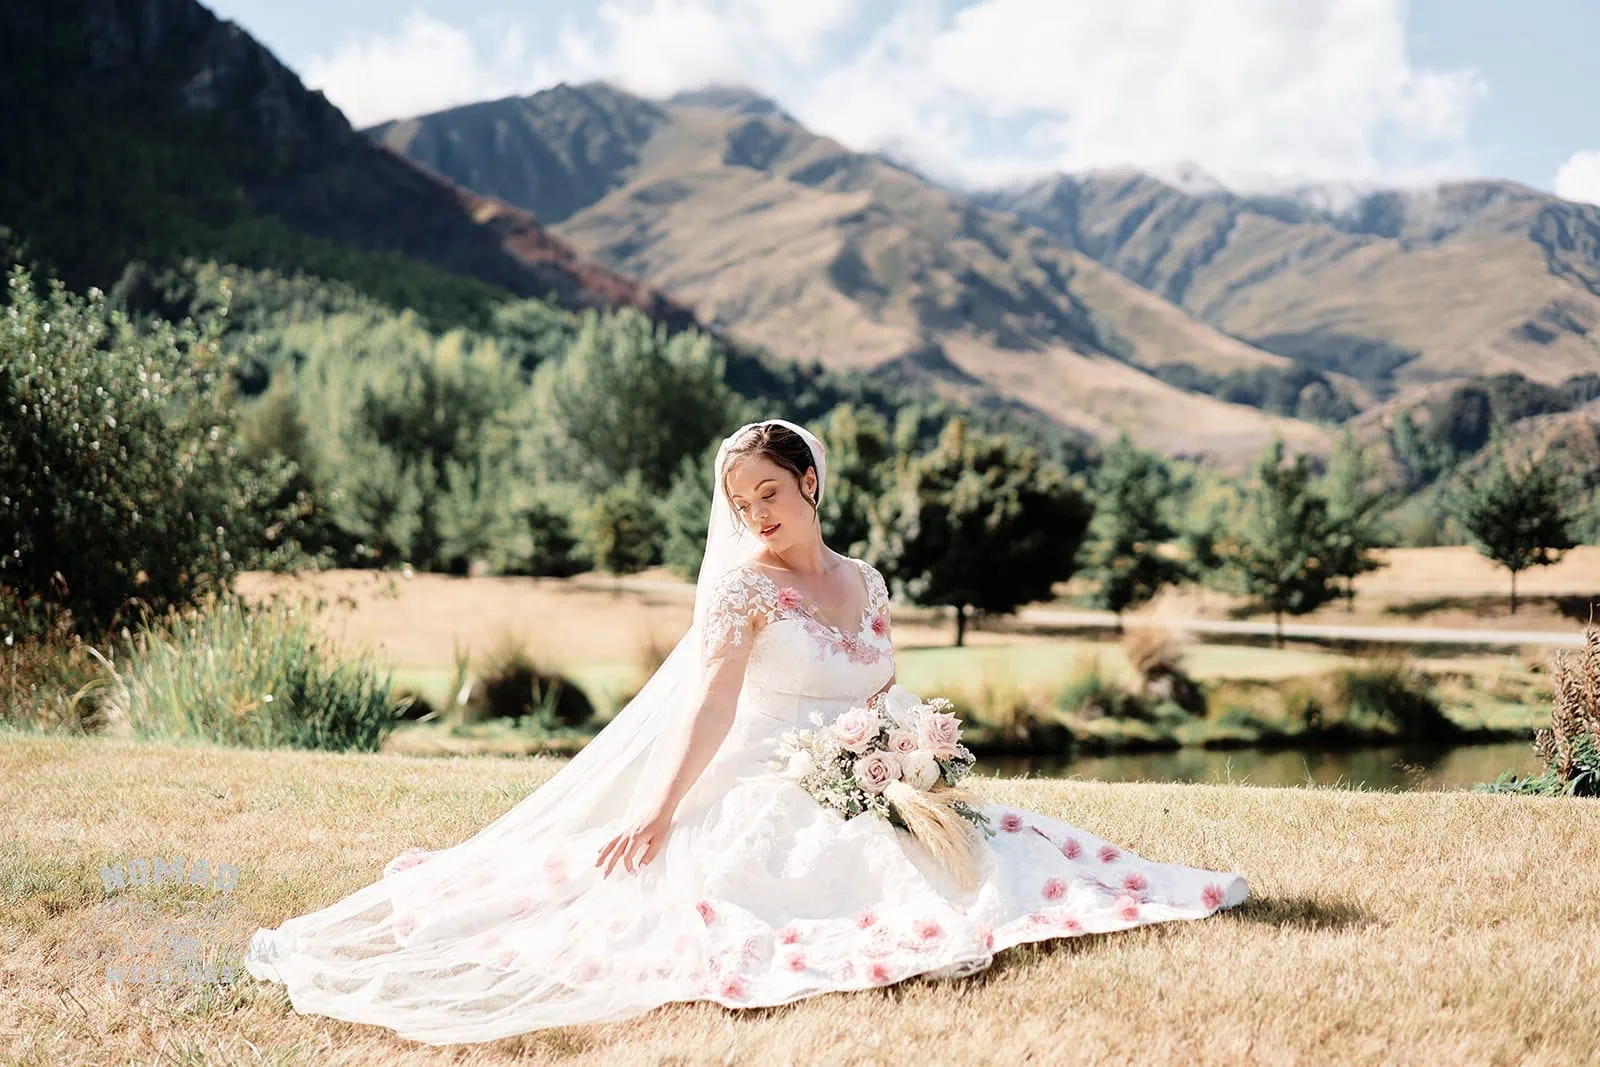 Queenstown New Zealand Elopement Wedding Photographer - A bride sitting on the grass with mountains in the background at one of Queenstown's summer ground spots.